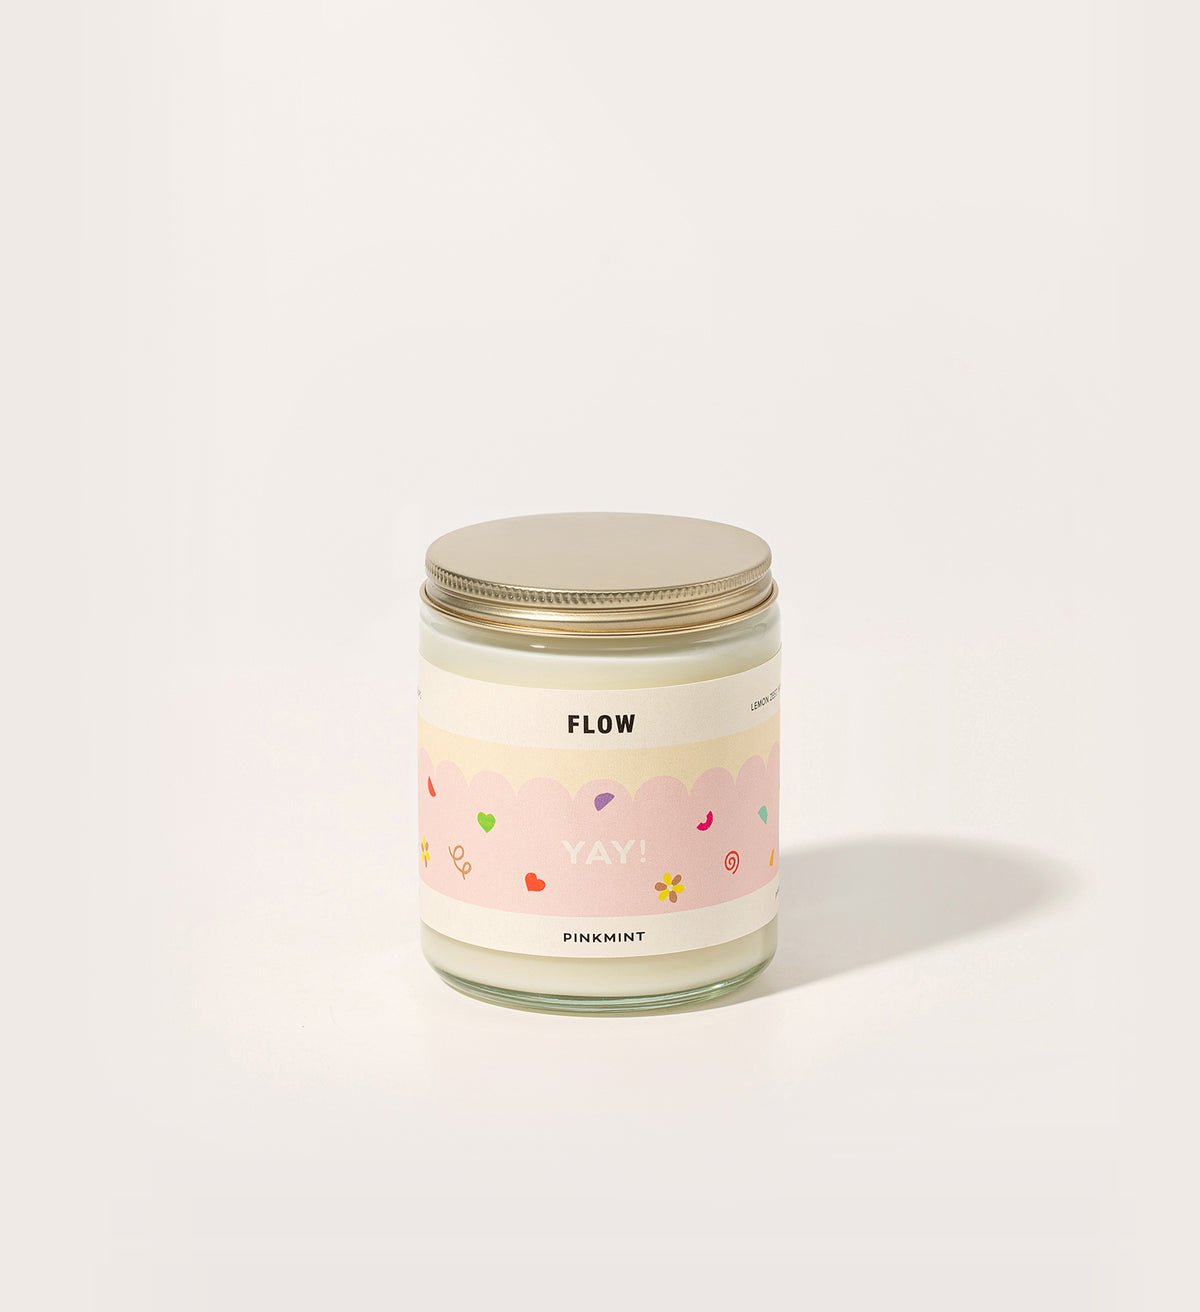 FLOW SOY CANDLE